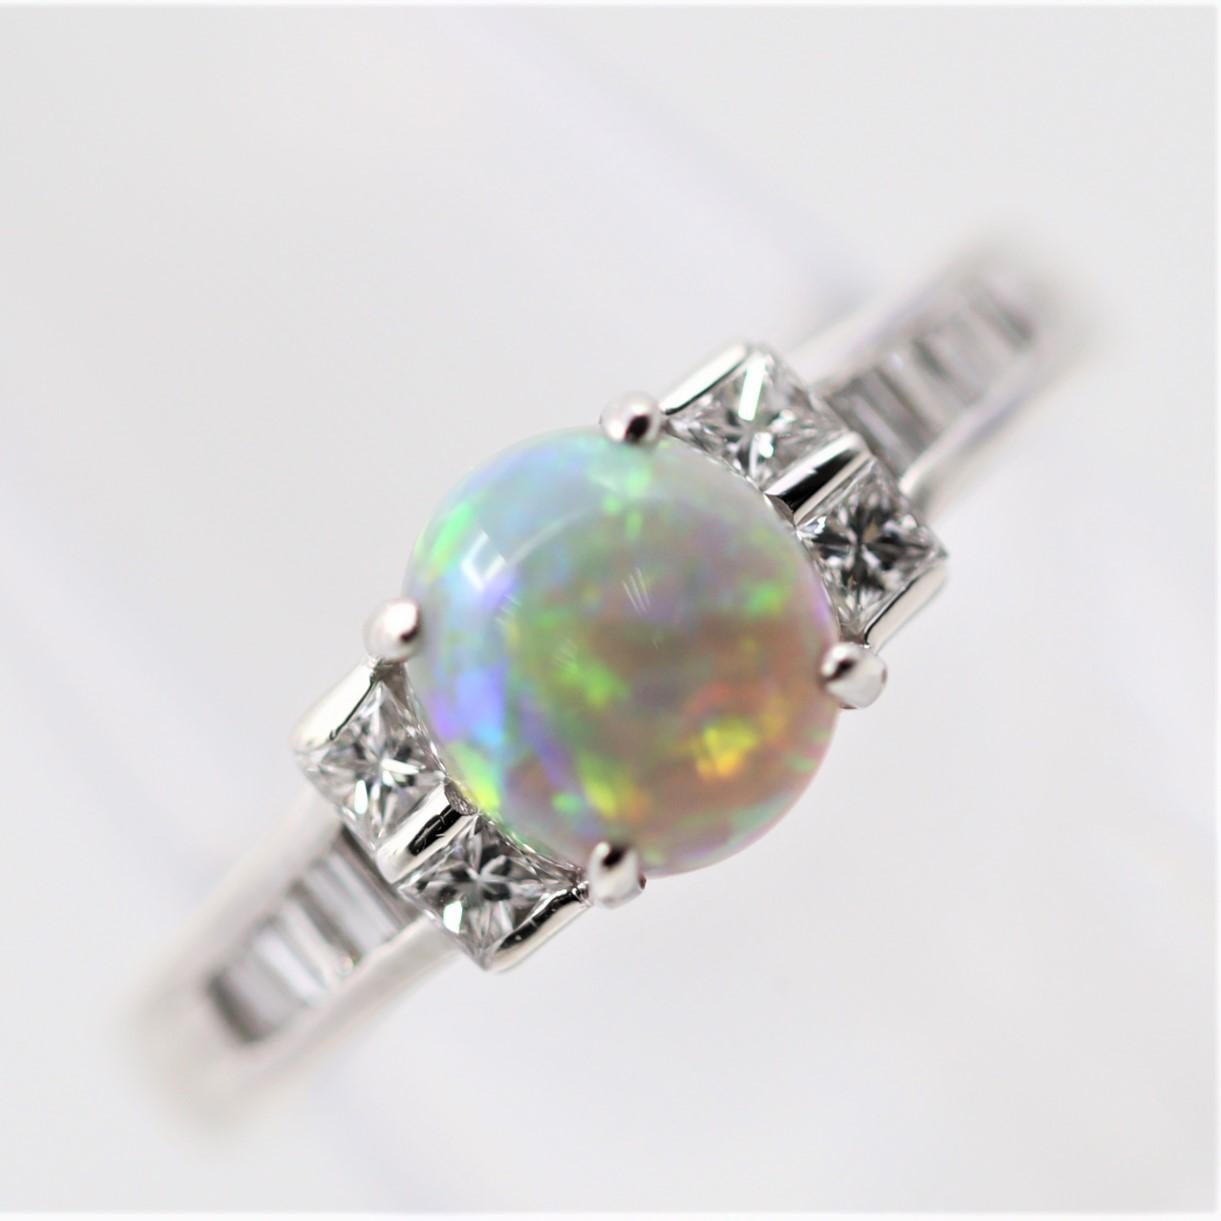 An exceptionally fine natural Australian opal takes center stage of this platinum made ring. It weighs 1.44 carats and has excellent play-of-color as an array of colors, from red and blue to orange and green, shine brightly across the entirety of